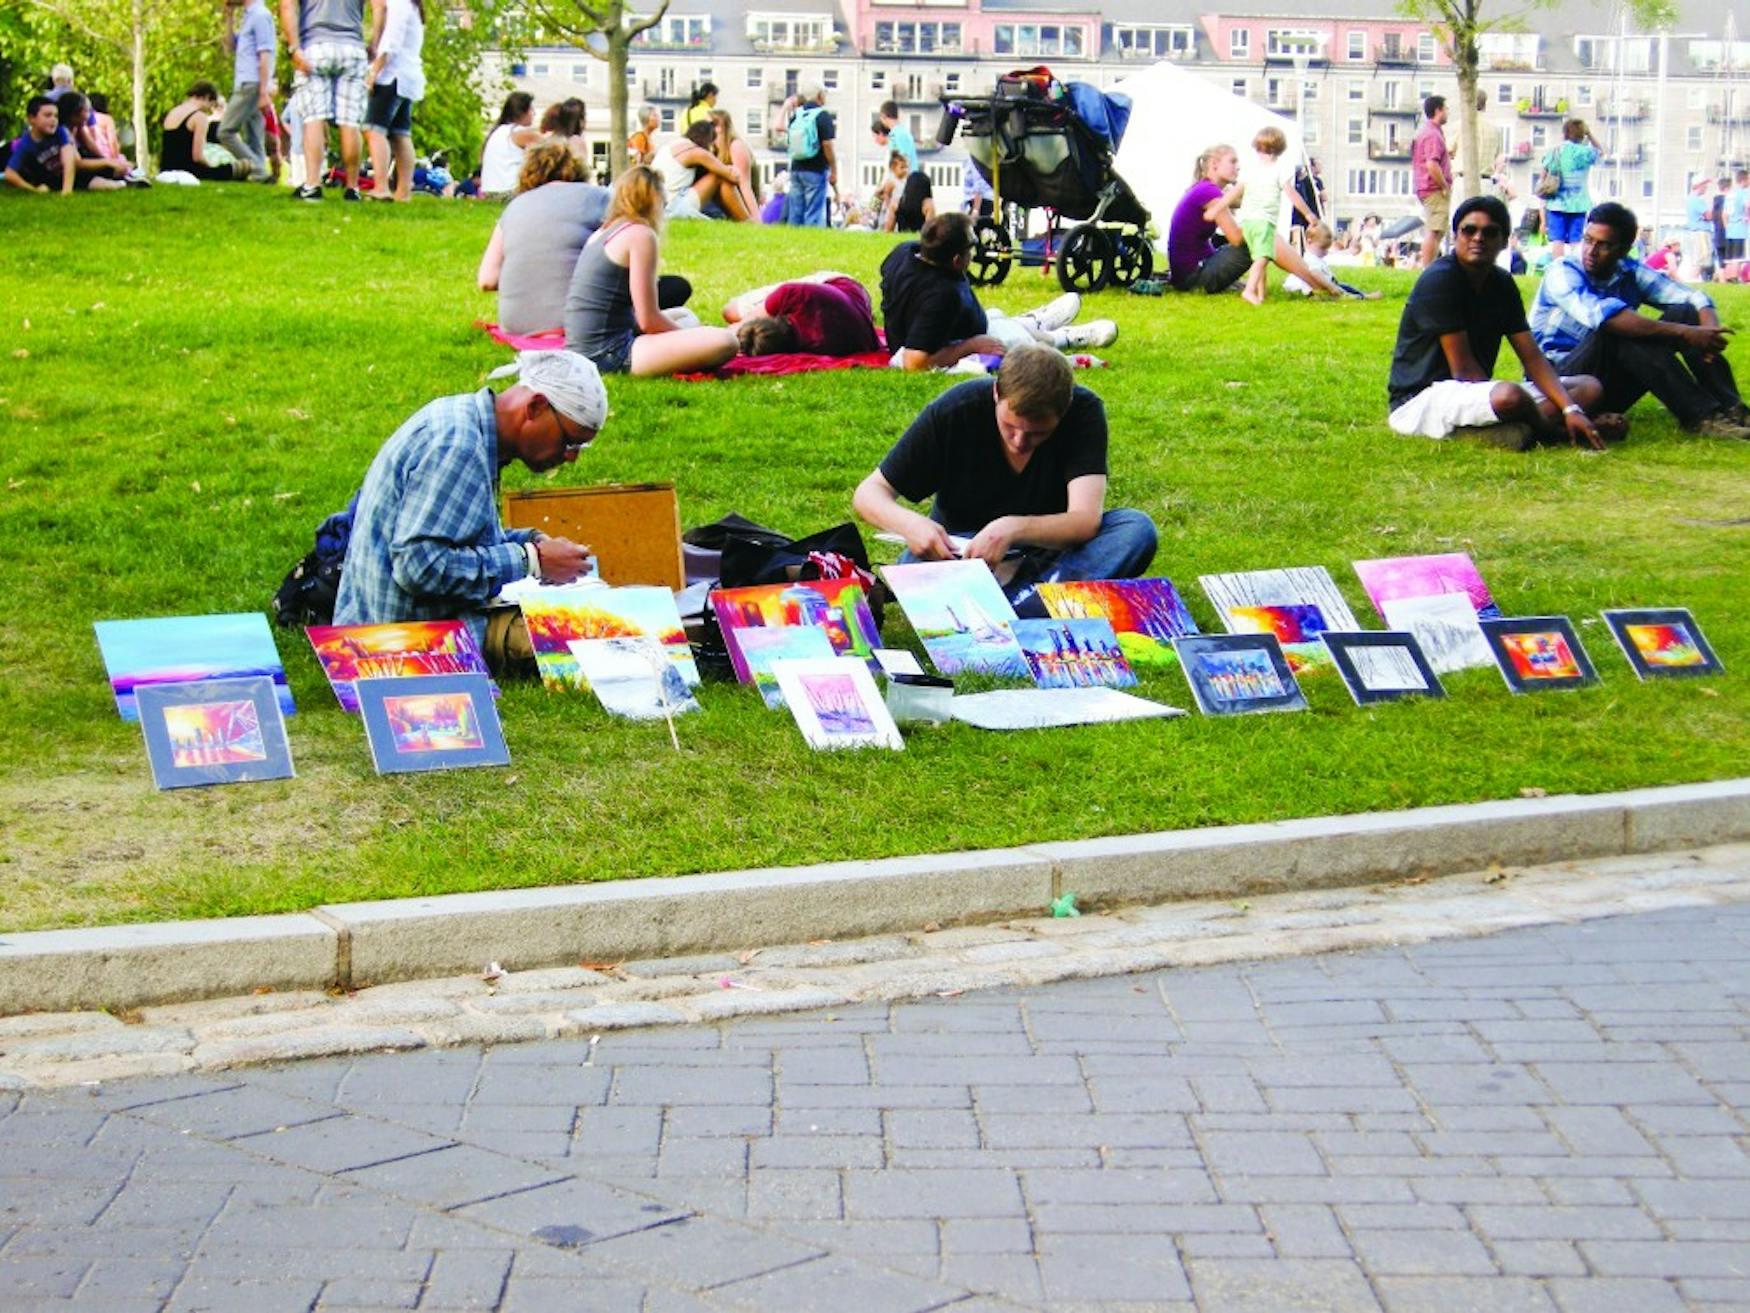 LOCALLY GROWN: Along with the other installations, the festival included many art vendors, including these men selling small hand-painted, colorful artwork.